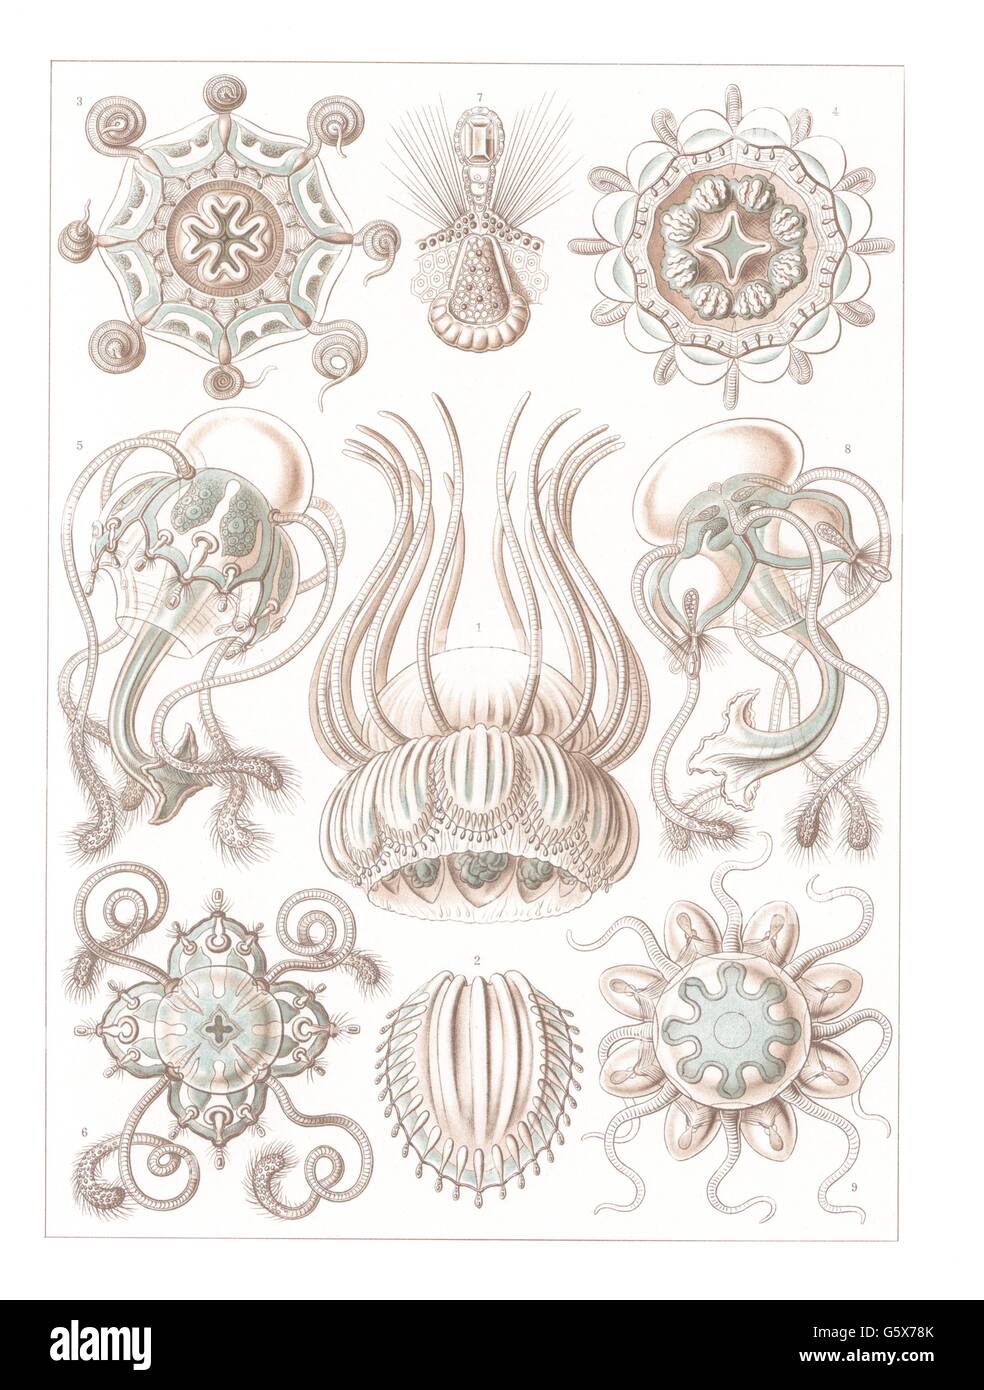 zoologie / Tiere, cnidaria, narcomedusae, Farblithographie, aus: Ernst Haeckel, 'Kunstformen der Natur', Leipzig - Wien, 1899 - 1904, Additional-Rights-Clearences-not available Stockfoto